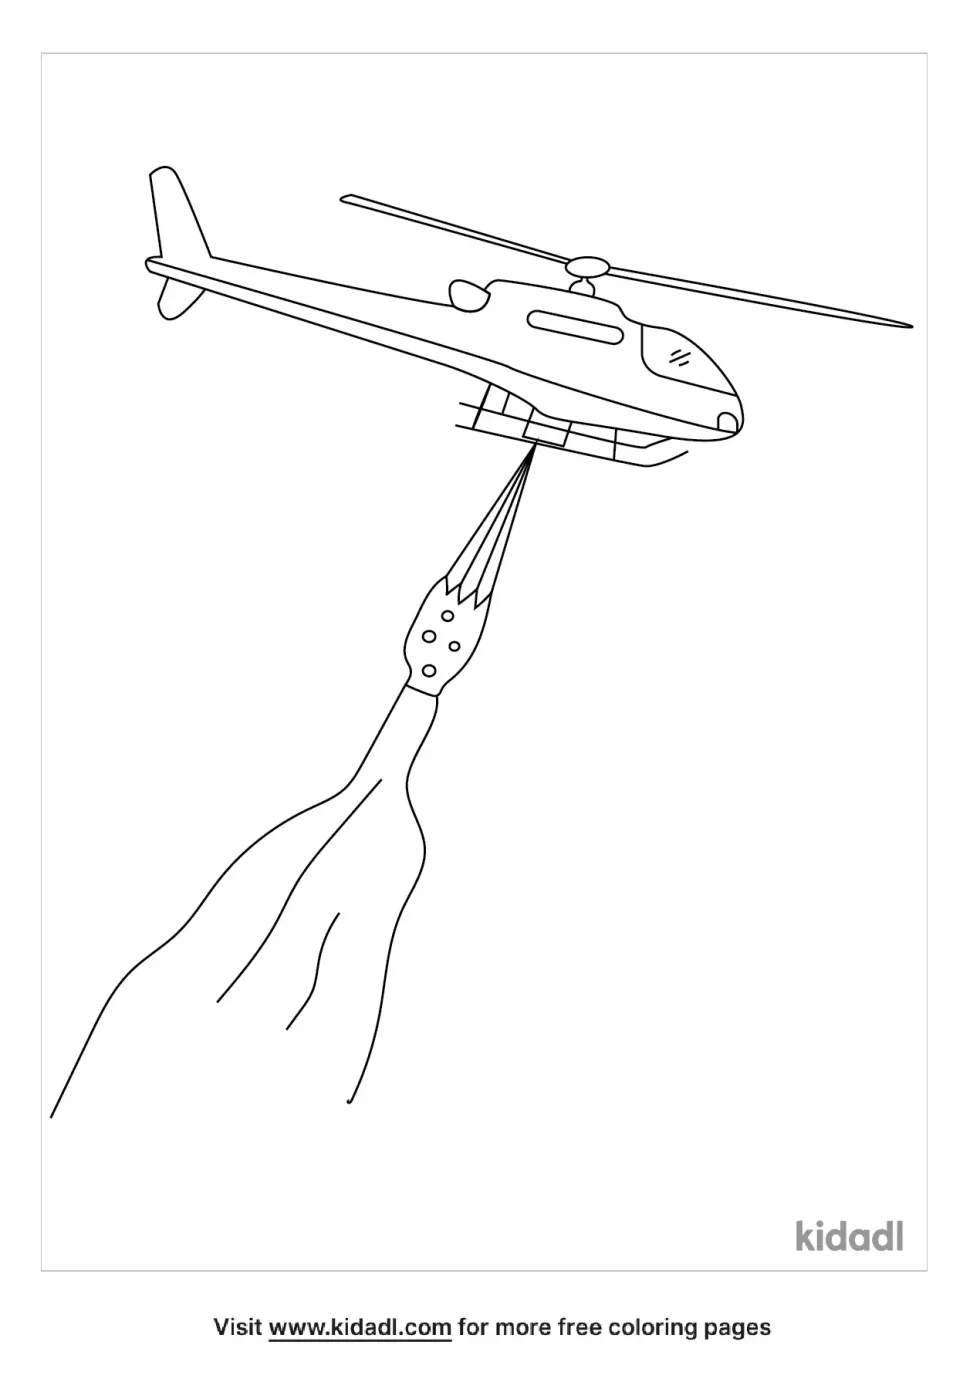 Water Dropping Helicpter Coloring Page